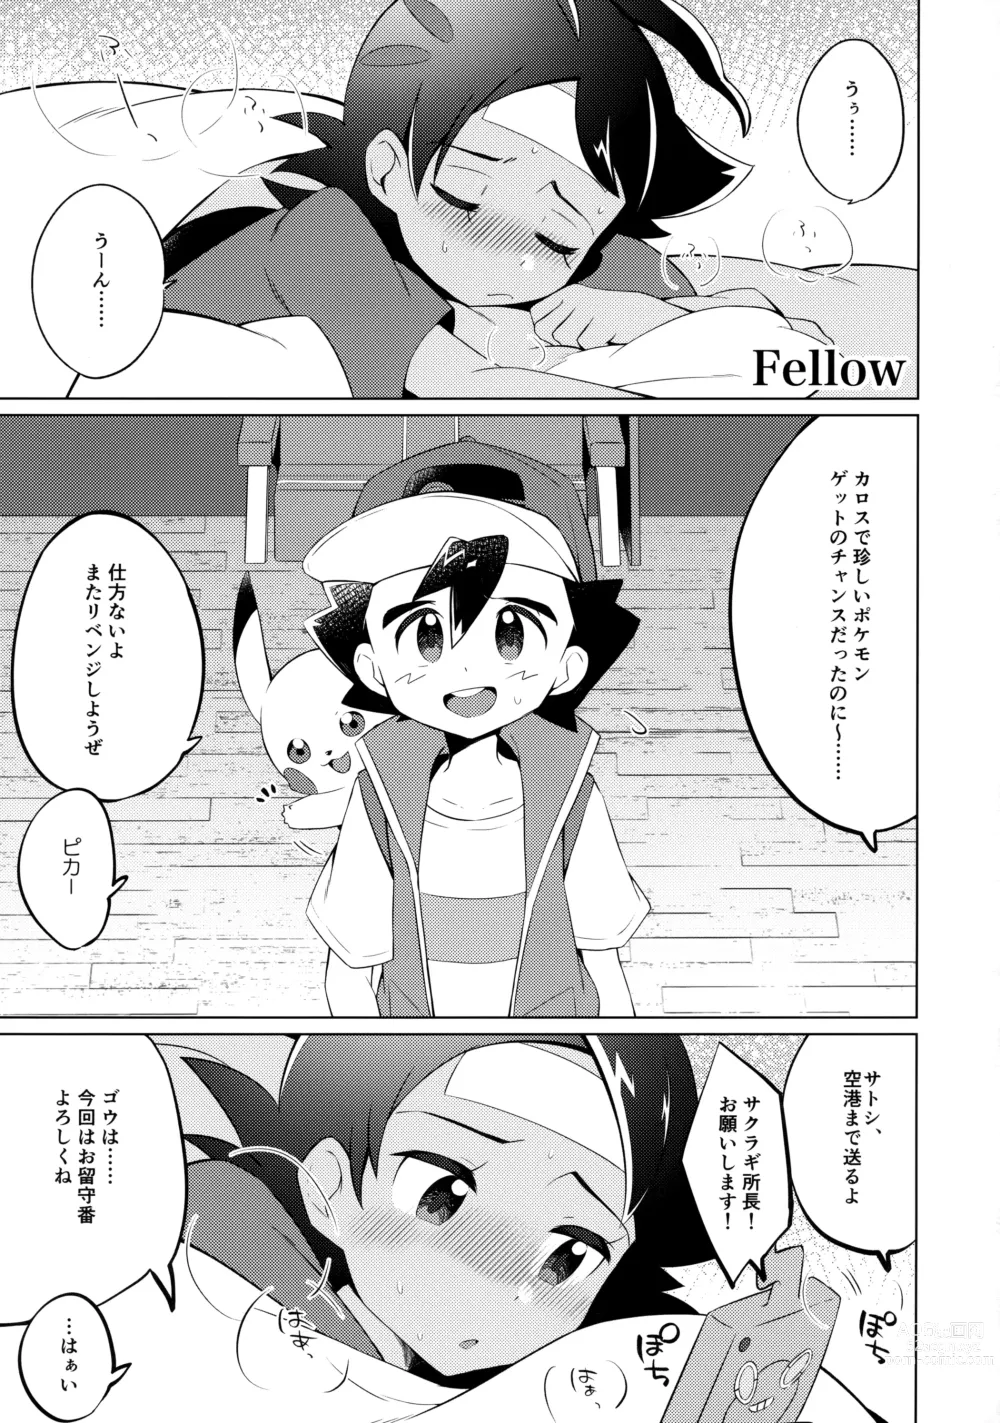 Page 2 of doujinshi Fellow & MYSTERIOUS MYSTERIOUS INVADER